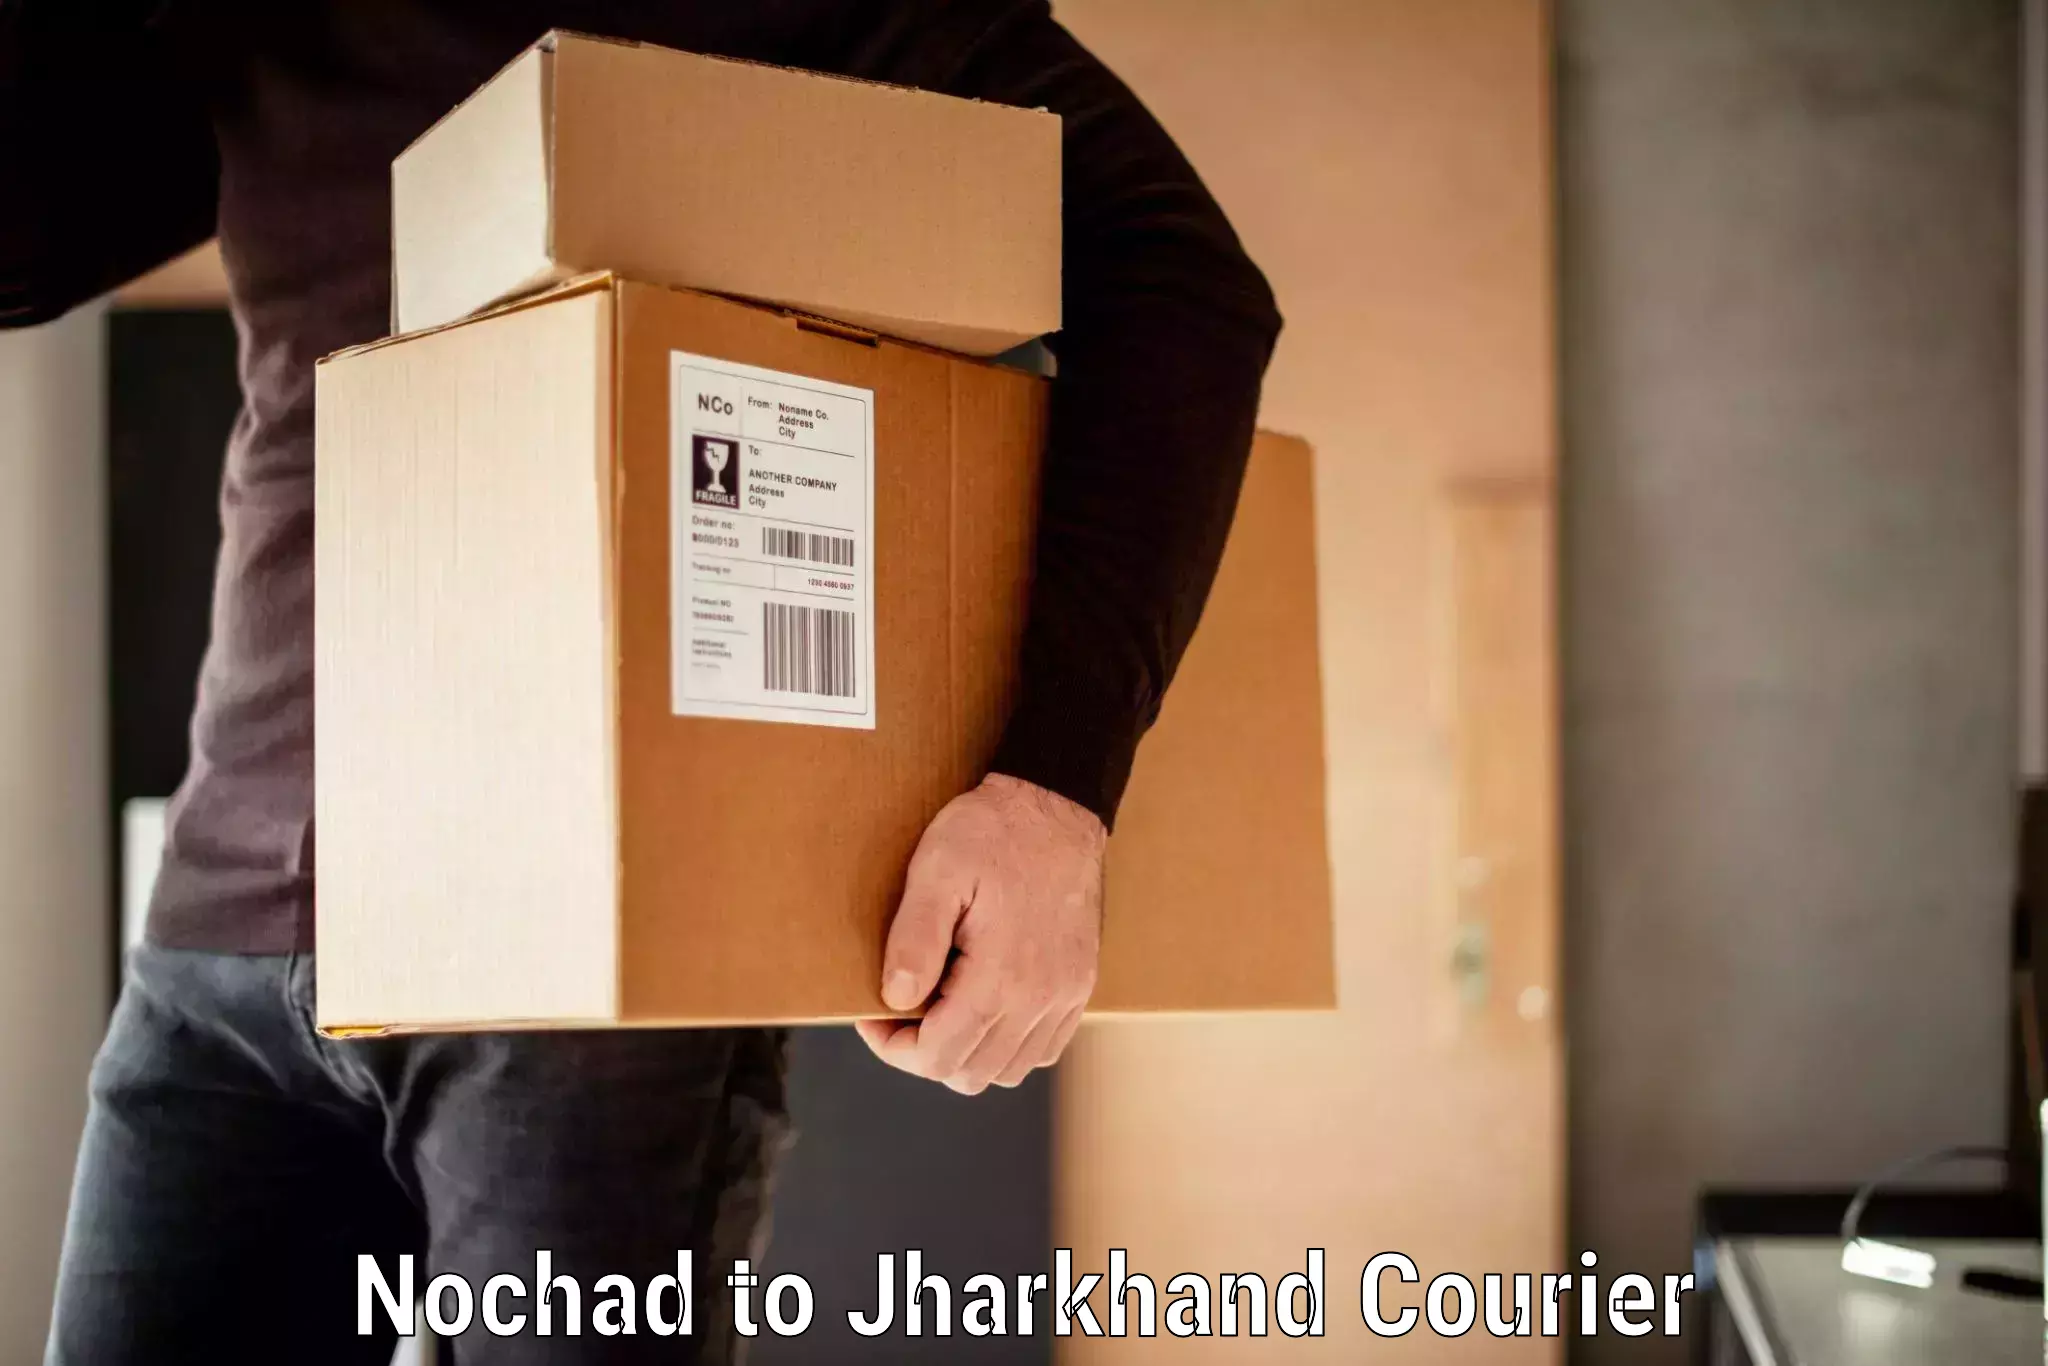 Baggage shipping experts Nochad to Jharkhand